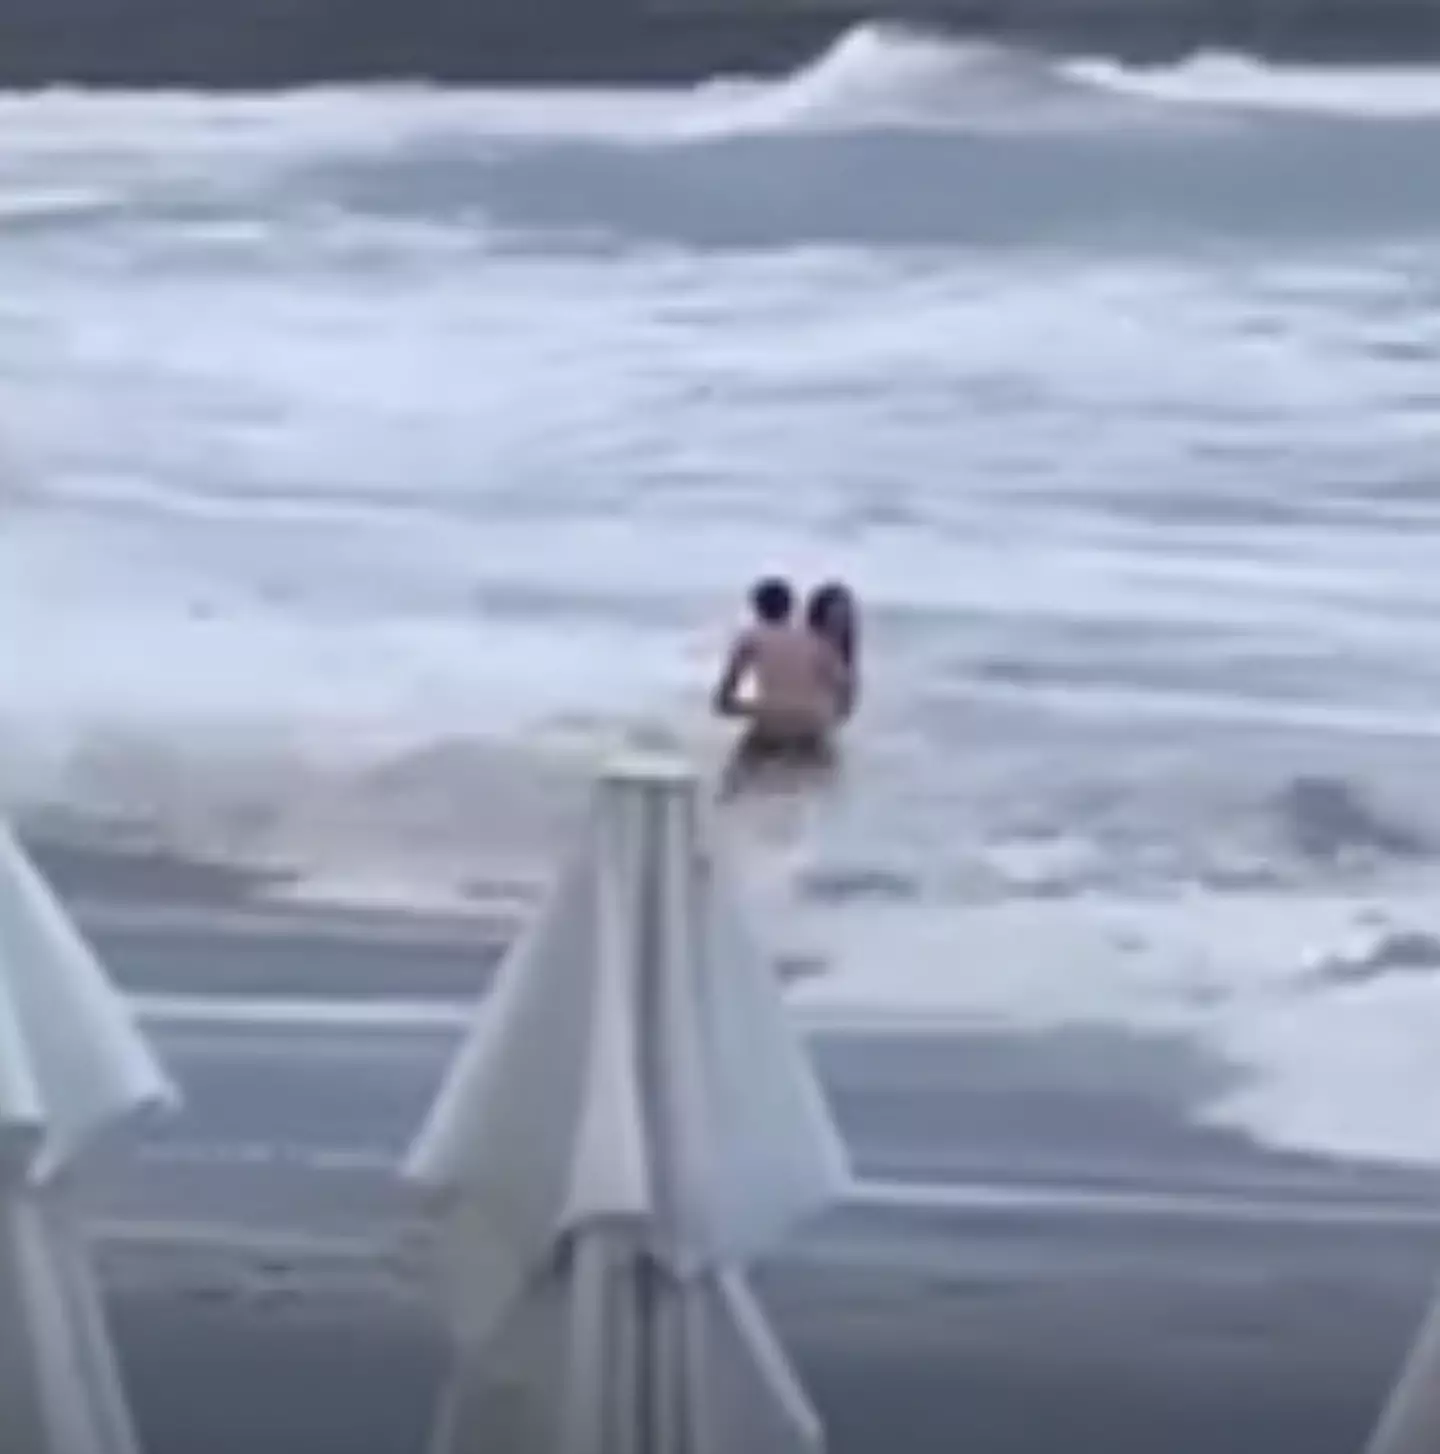 The couple were seen embracing before the woman was swept out to sea. (Newsflash)